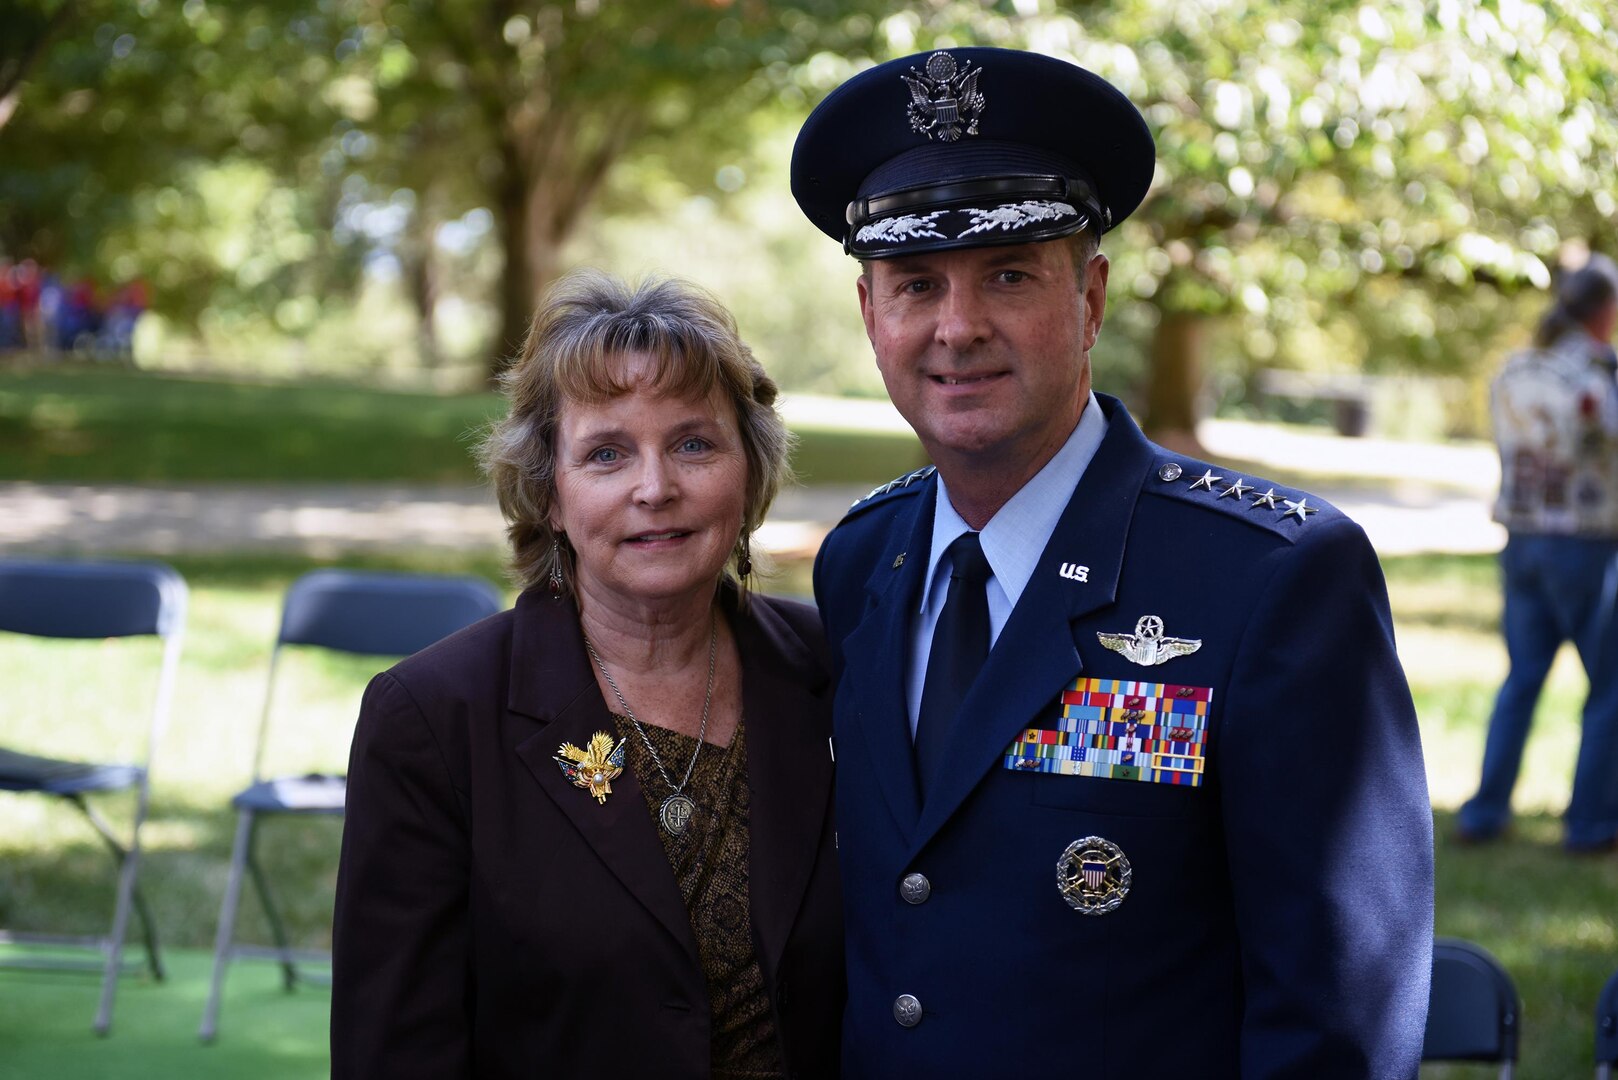 Air Force Gen. Joseph Lengyel, chief of the National Guard Bureau, and Mrs. Sally Lengyel at commemorative ceremonies on Gold Star Mother's and Family's Day, Arlington National Cemetery, Arlington, Virginia, Sept. 25, 2016.  Lengyel, the chief of the National Guard Bureau, has released a holiday message to National Guard members and their families.